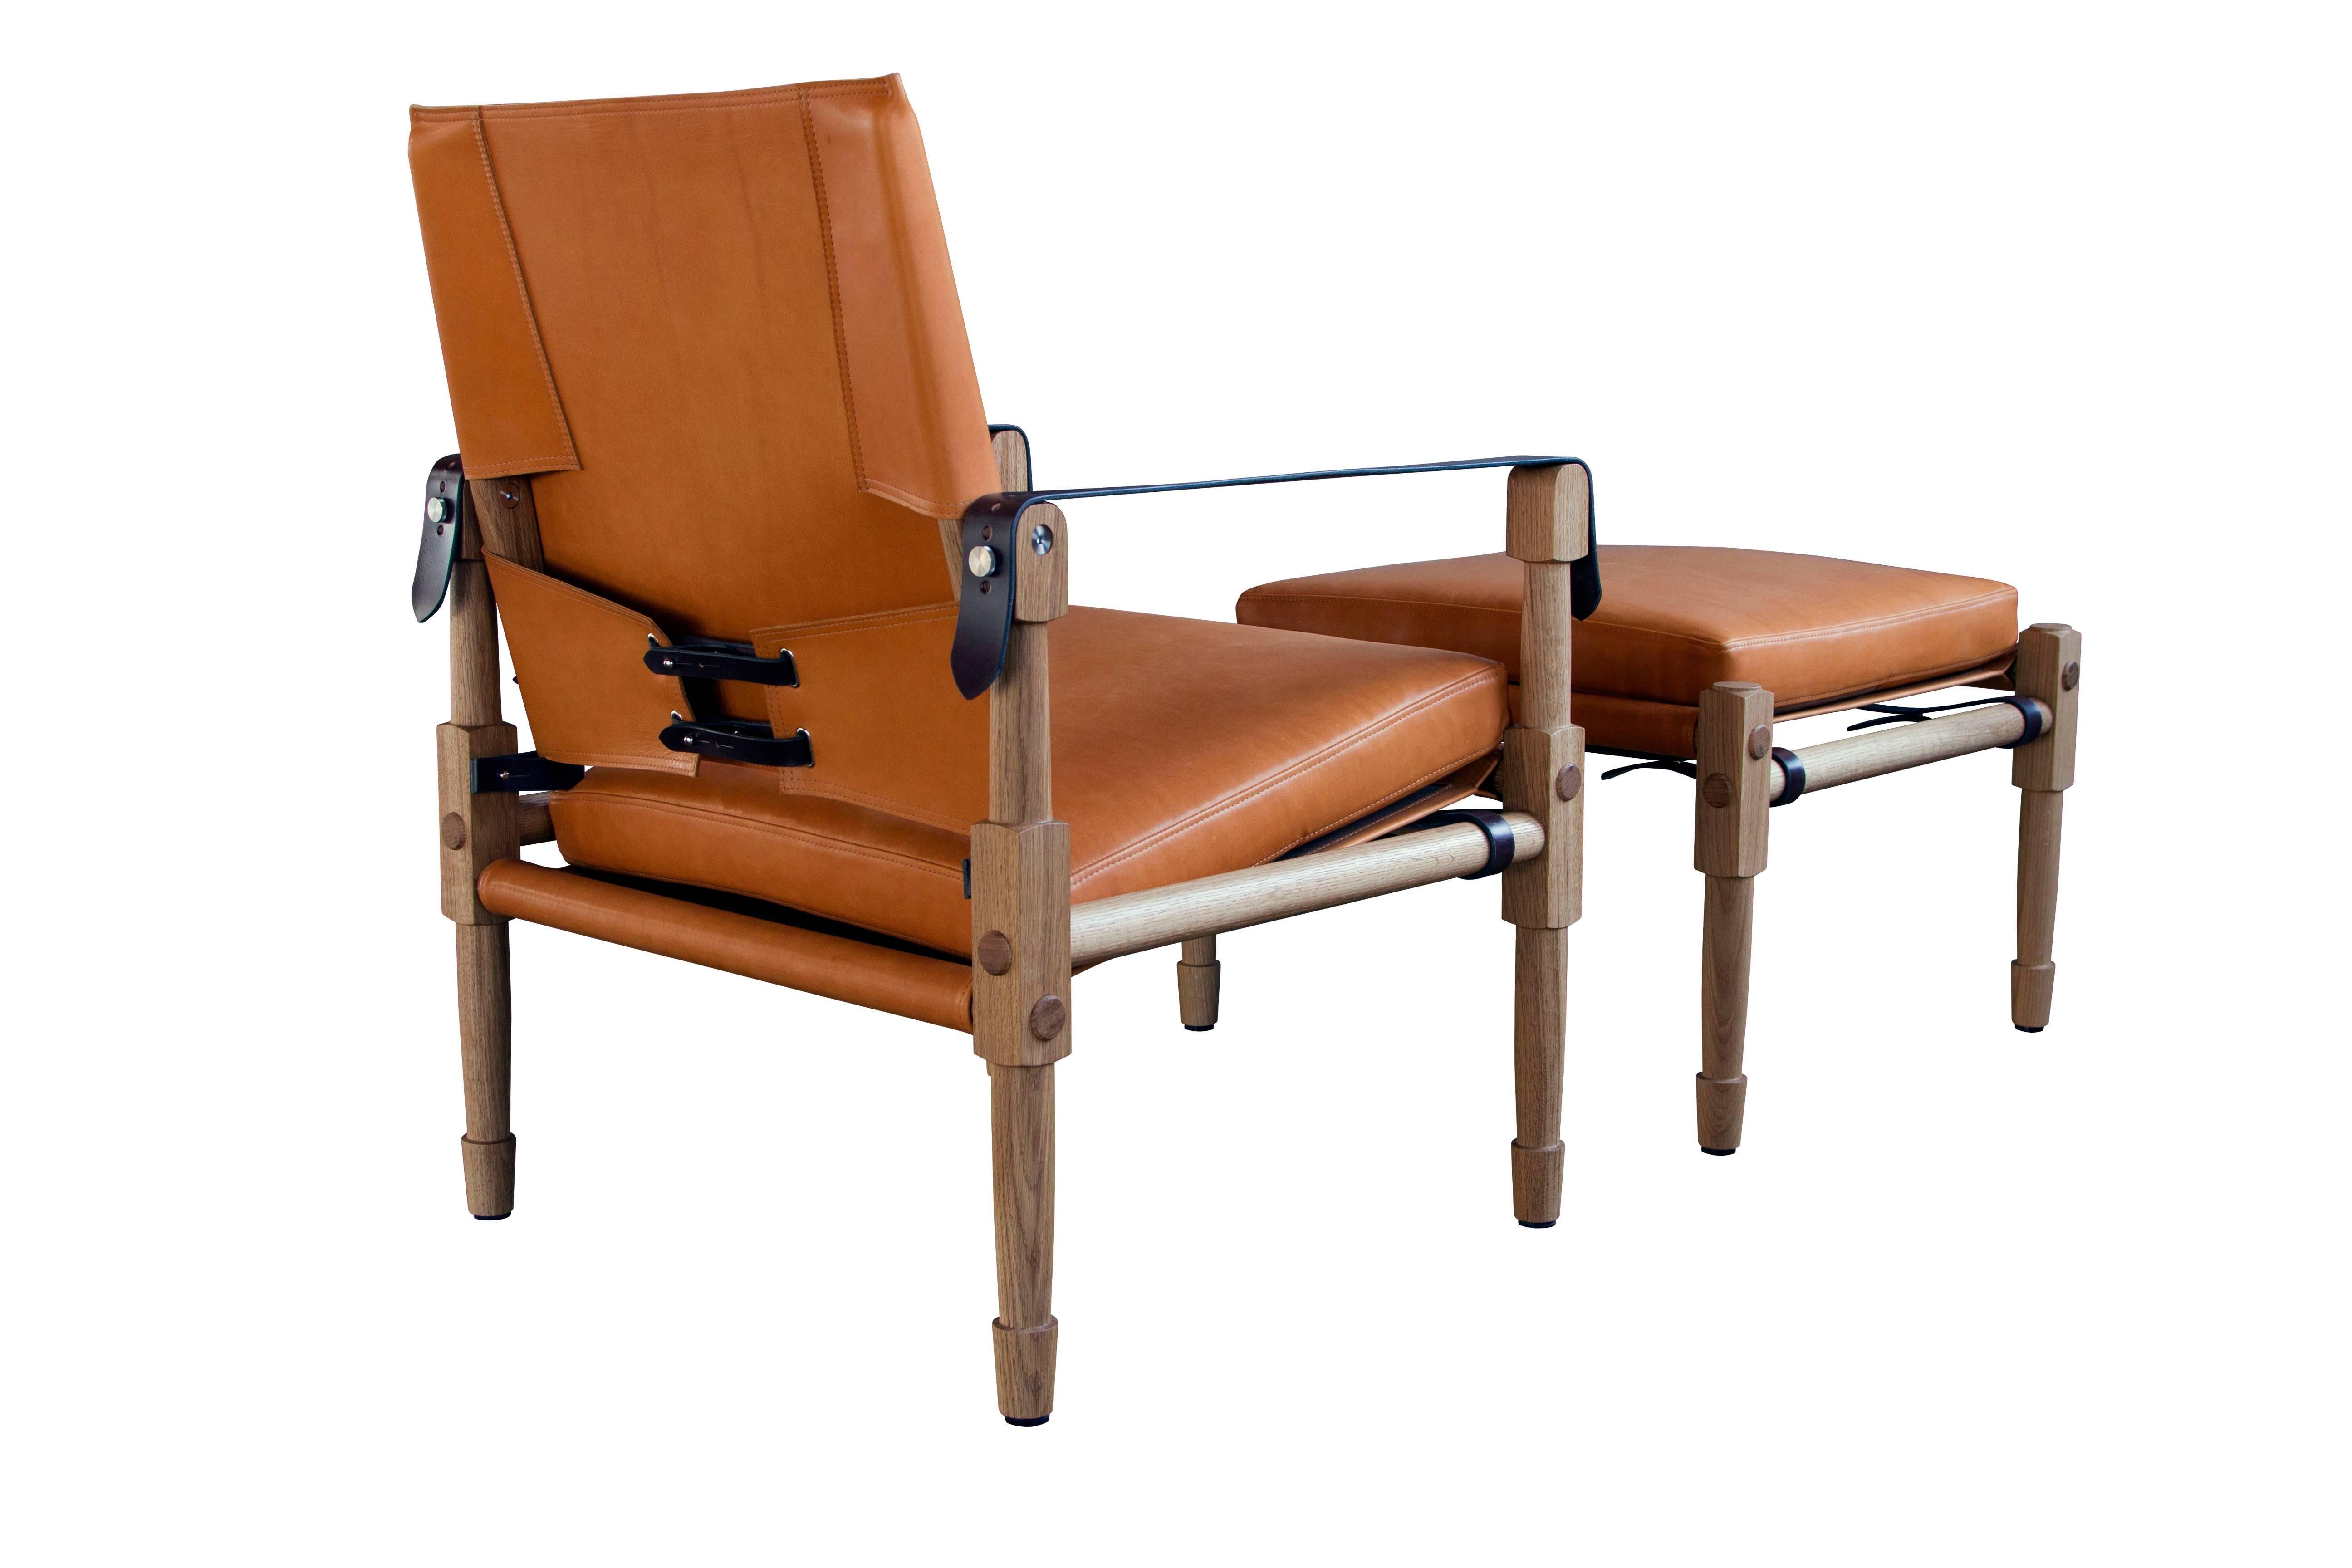 The Grand Chatwin Lounge chair and ottoman in oiled white oak with Moore & Giles: Valhalla / Antique Gold leather upholstery and Havana English bridle leather strapping.

The modern campaign collection by Richard Wrightman combines the vernacular of